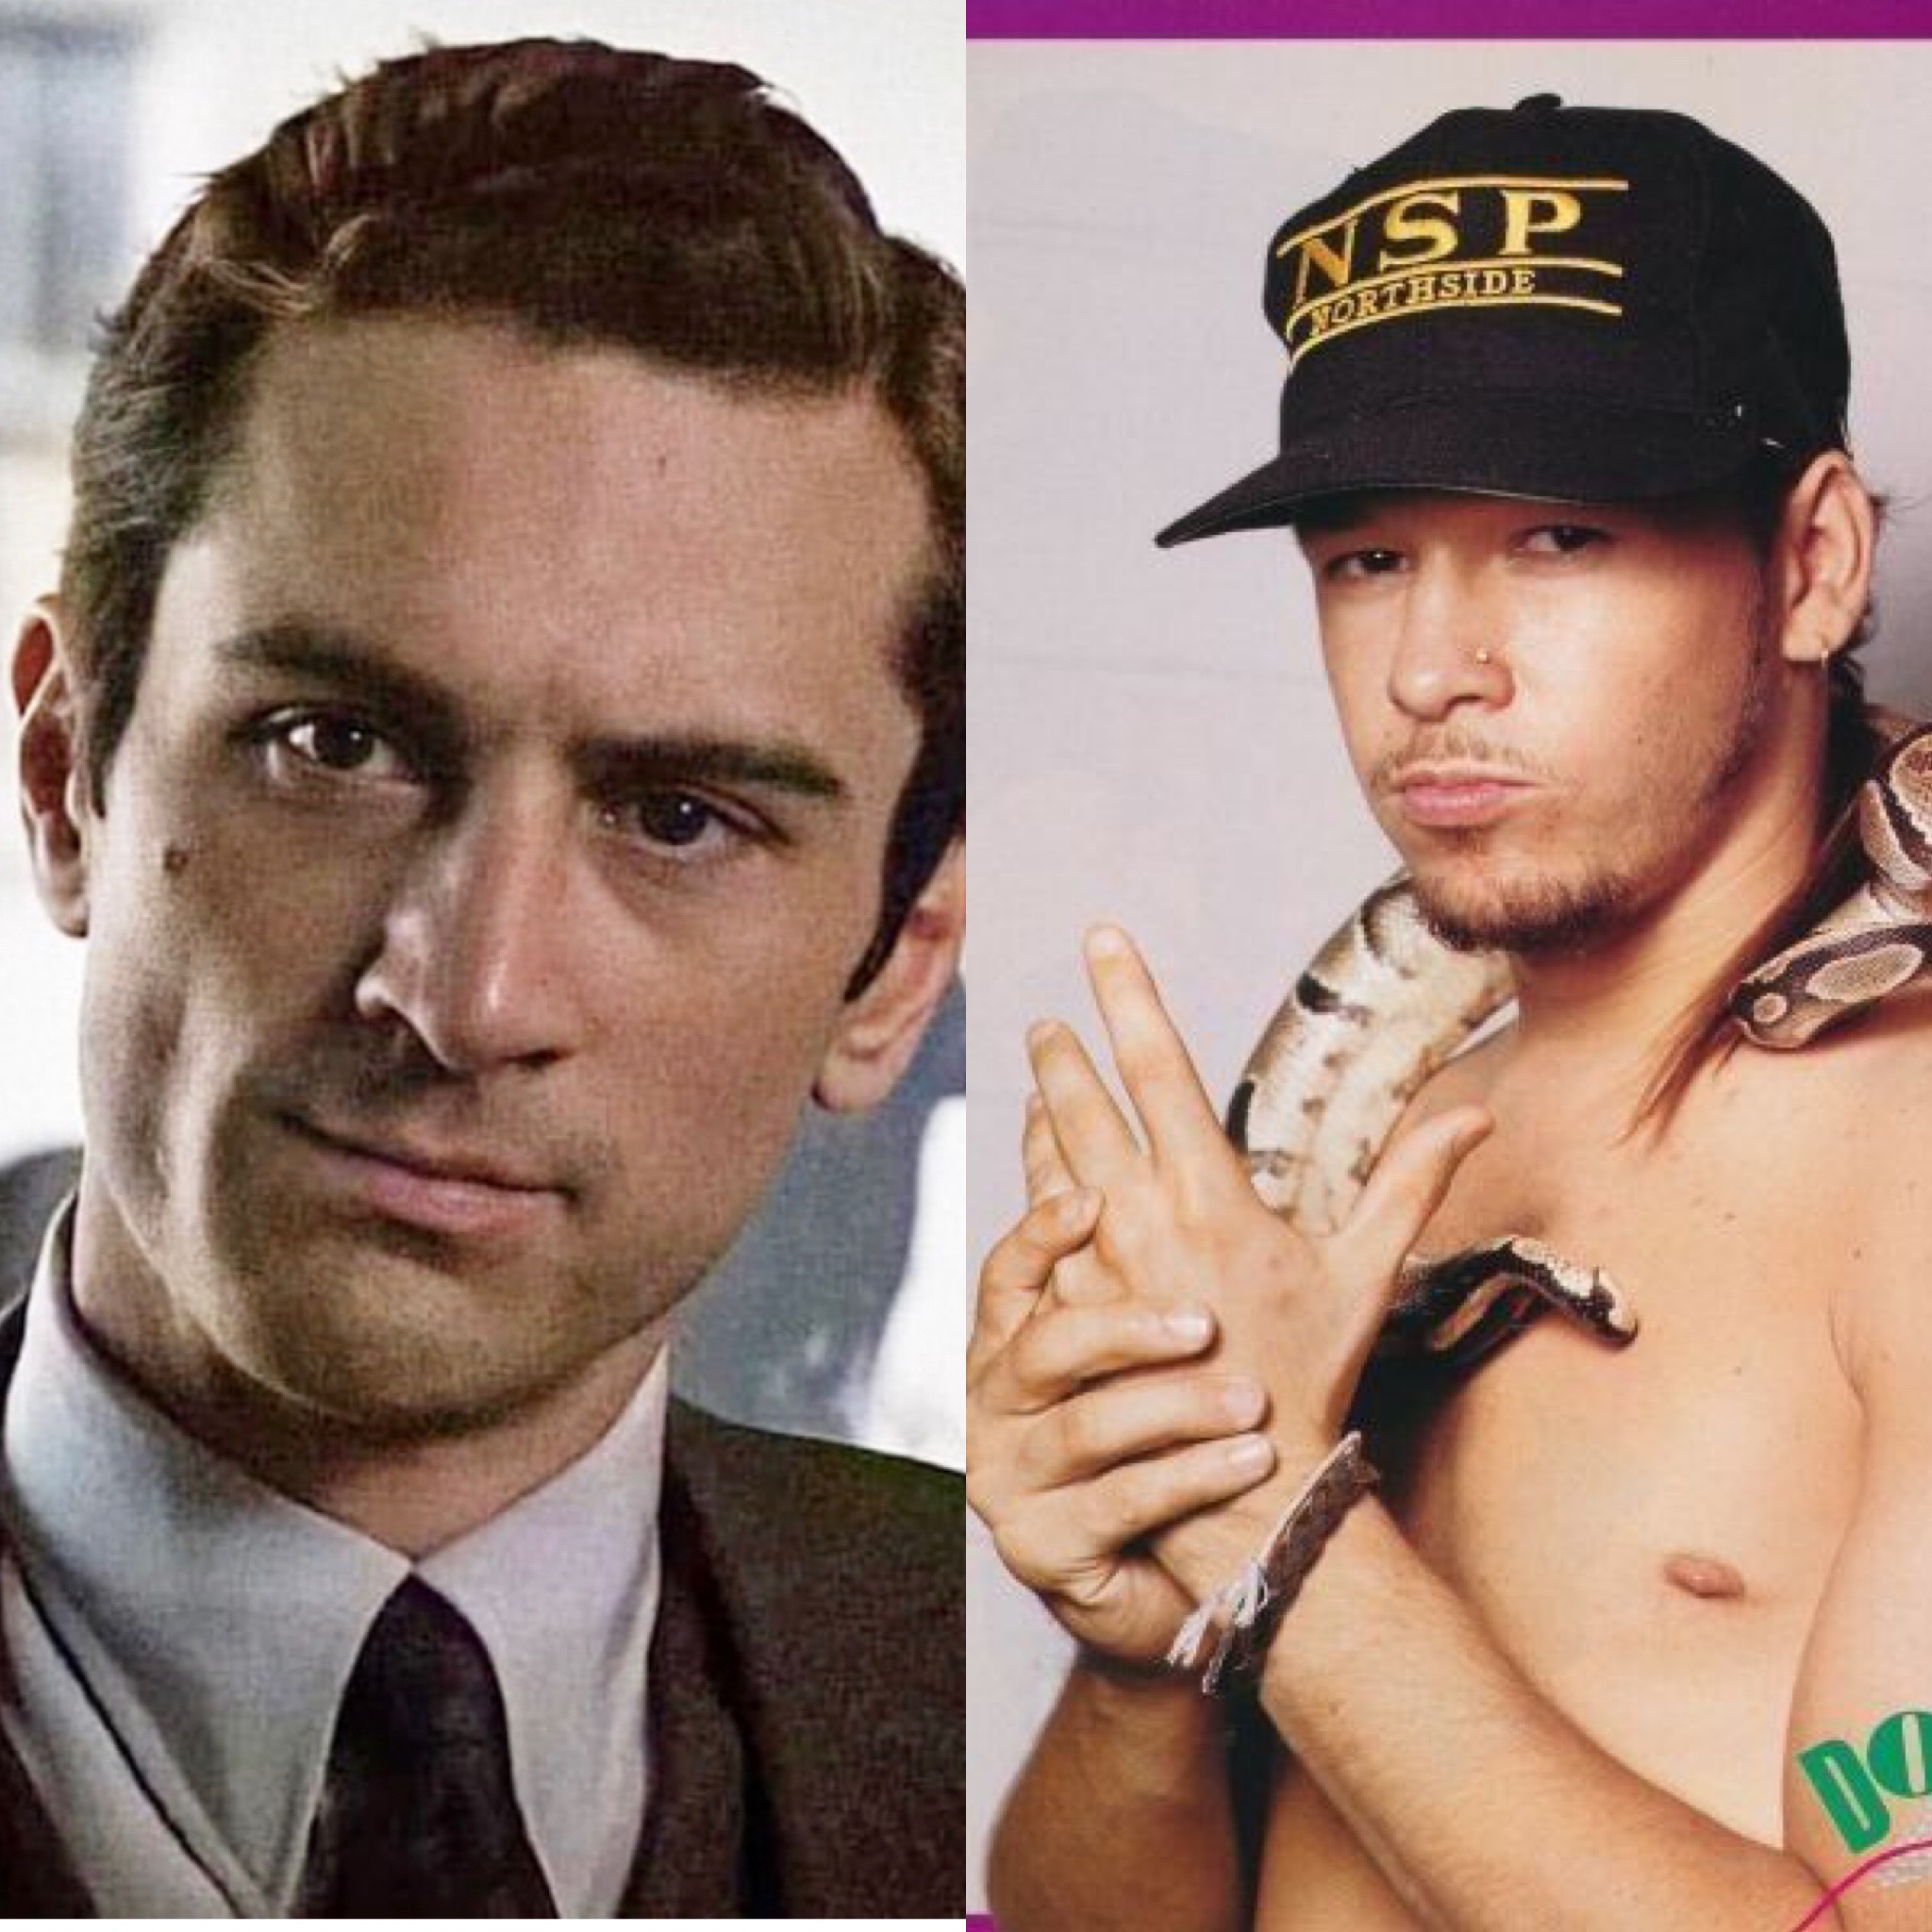 Happy birthday to my two favorite actors, Robert De Niro and Donnie Wahlberg 